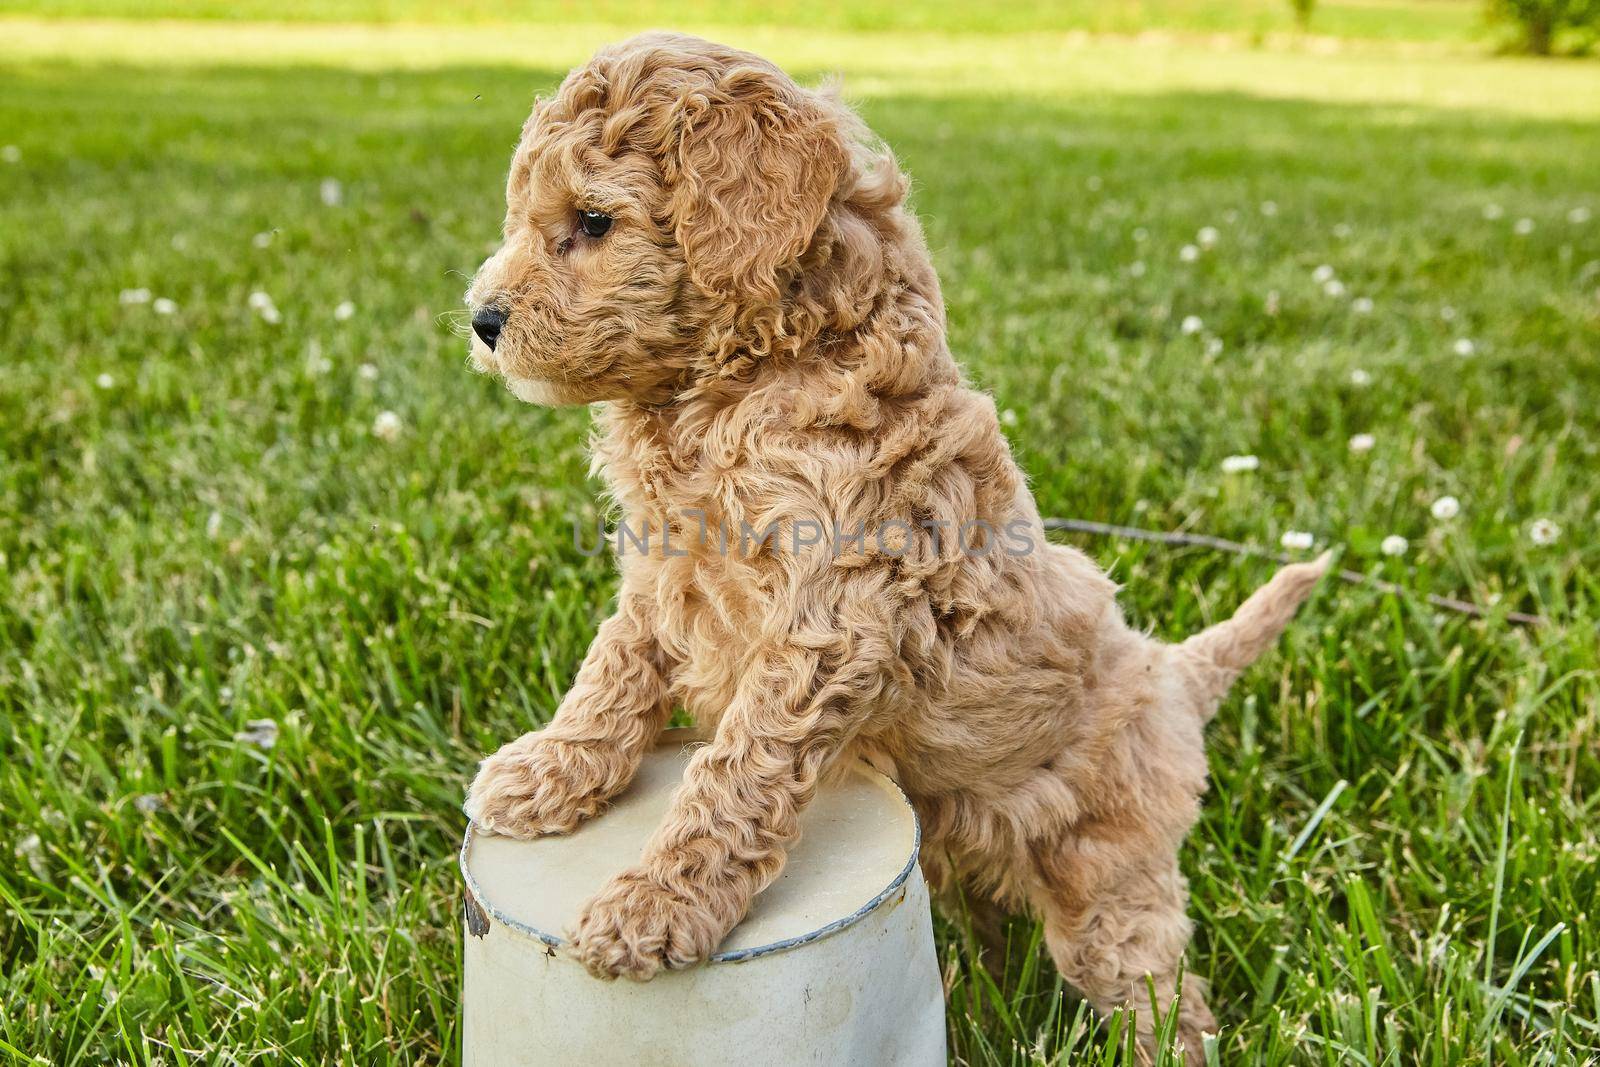 Goldendoodle puppy stepping over flowerpot in grass by njproductions